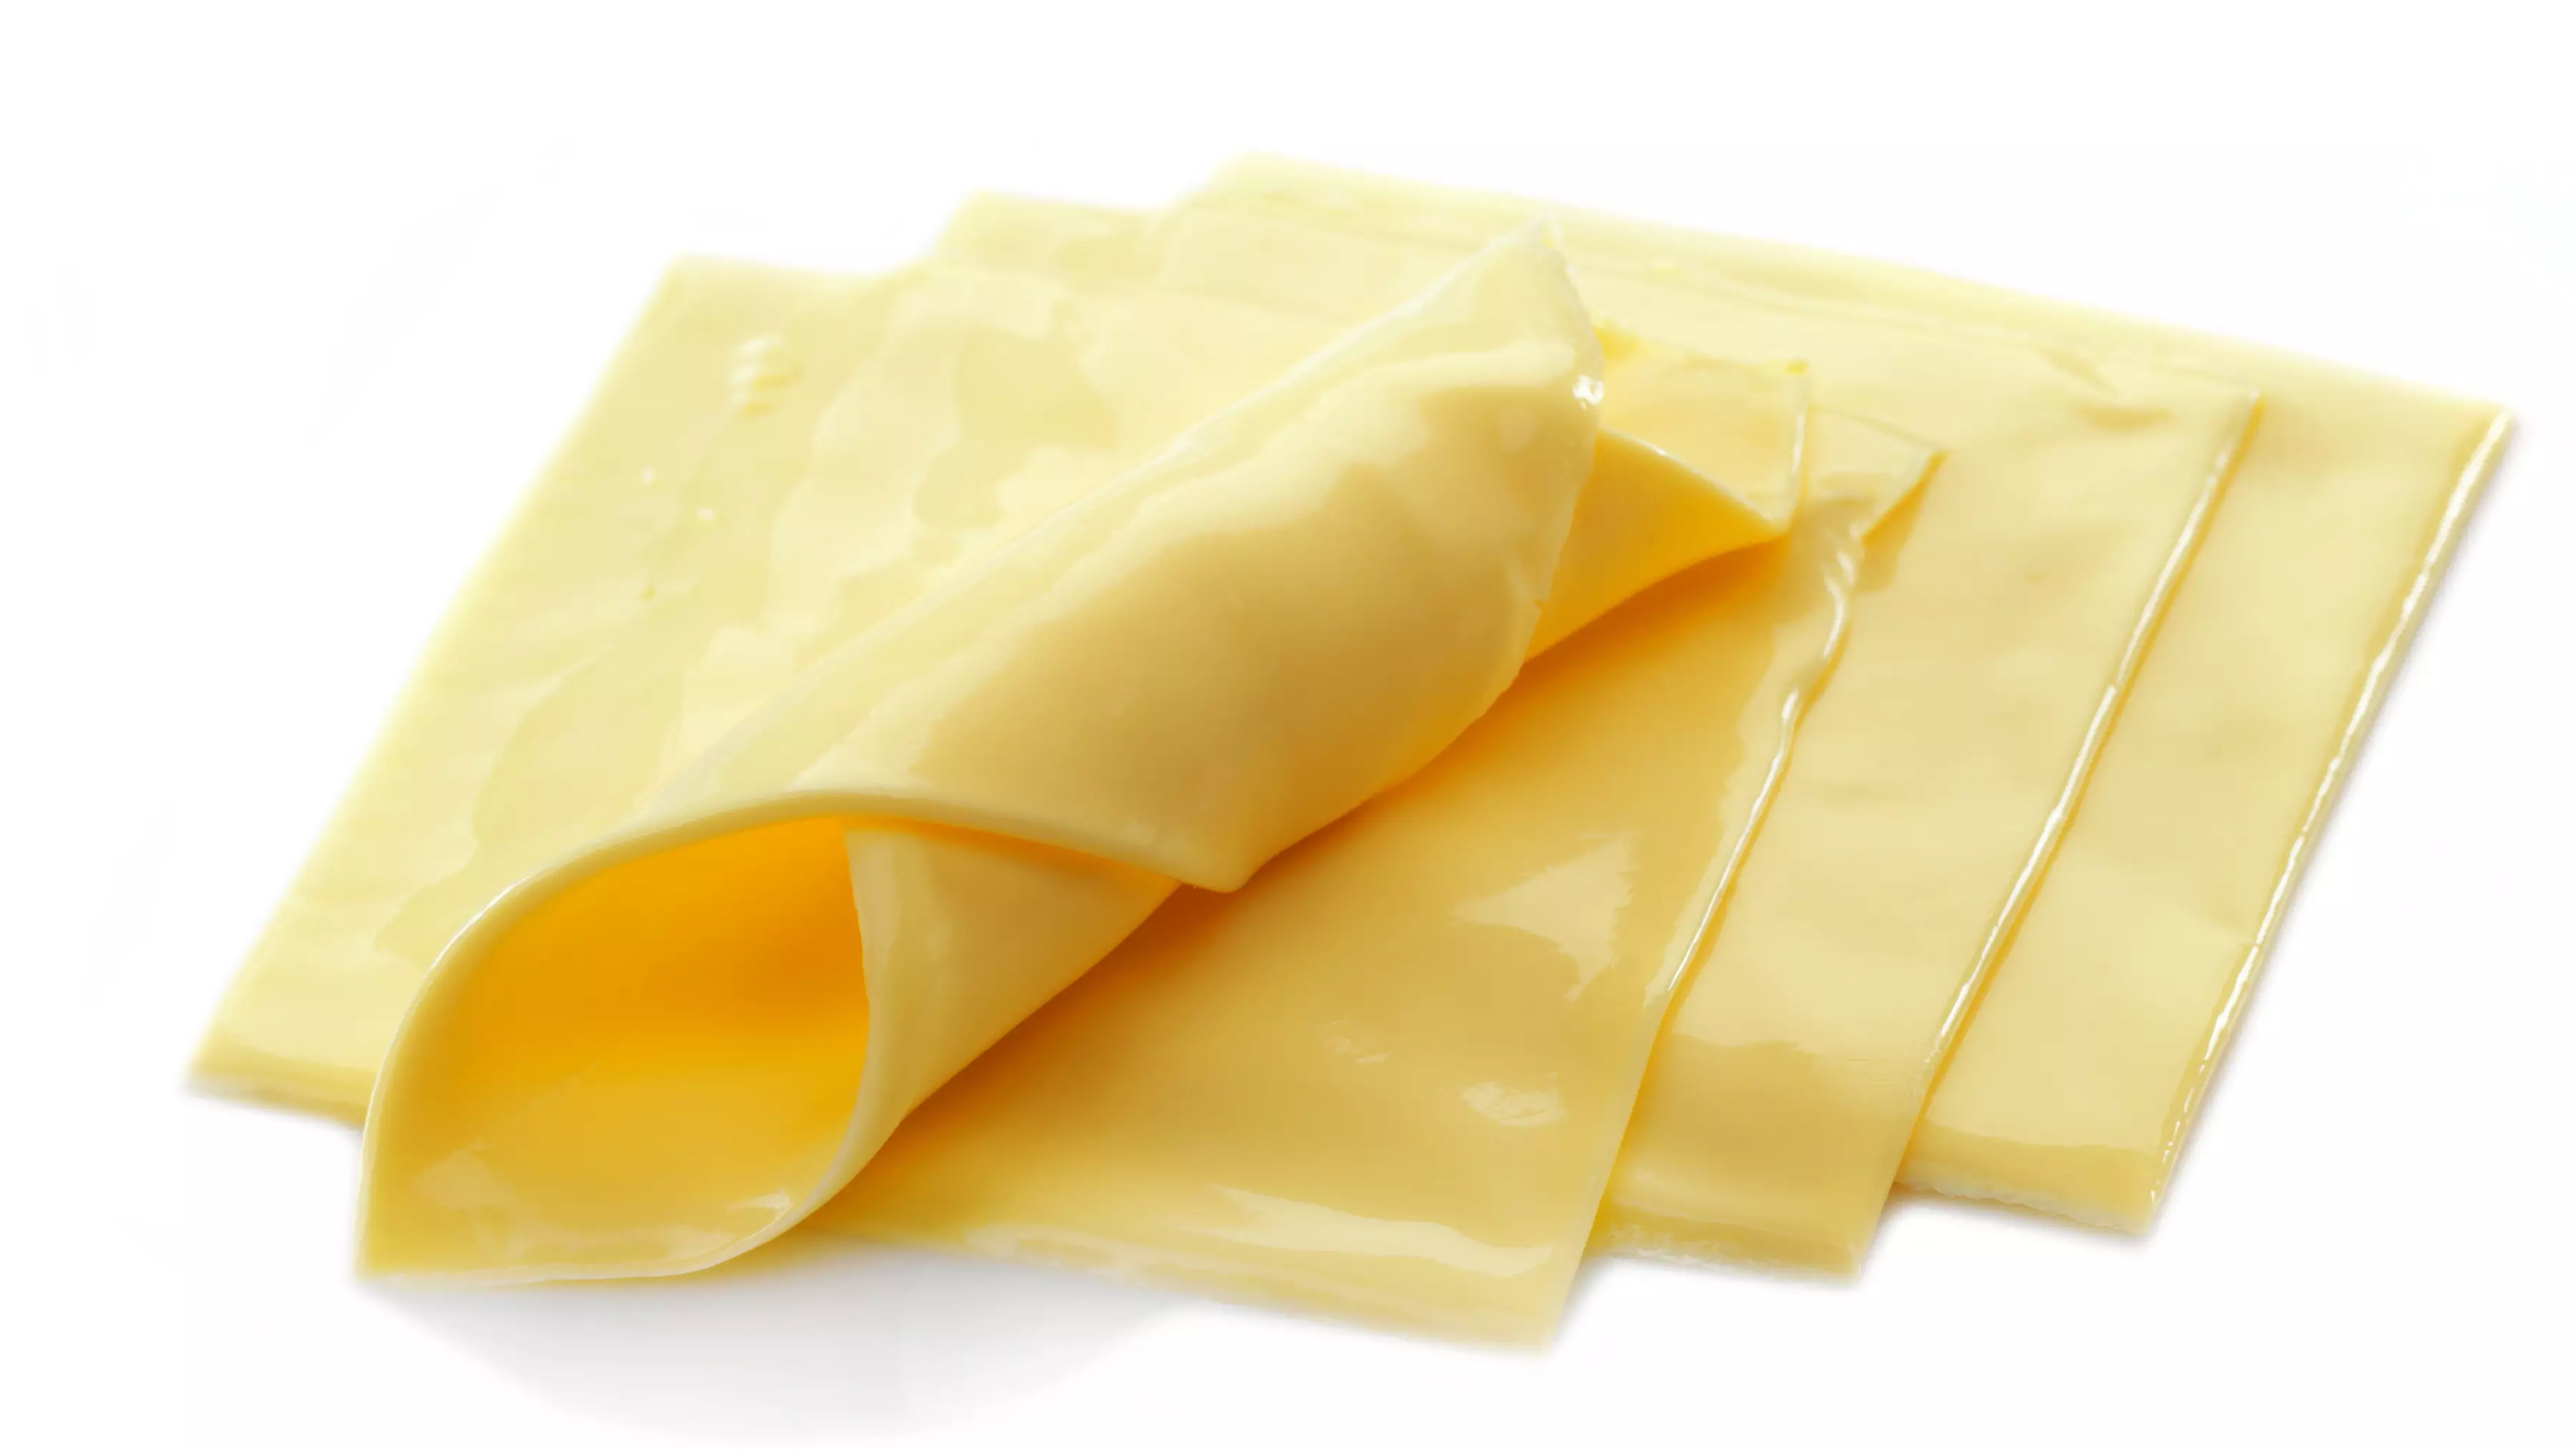 Sliced Processed Cheese Voted The UK's Favourite